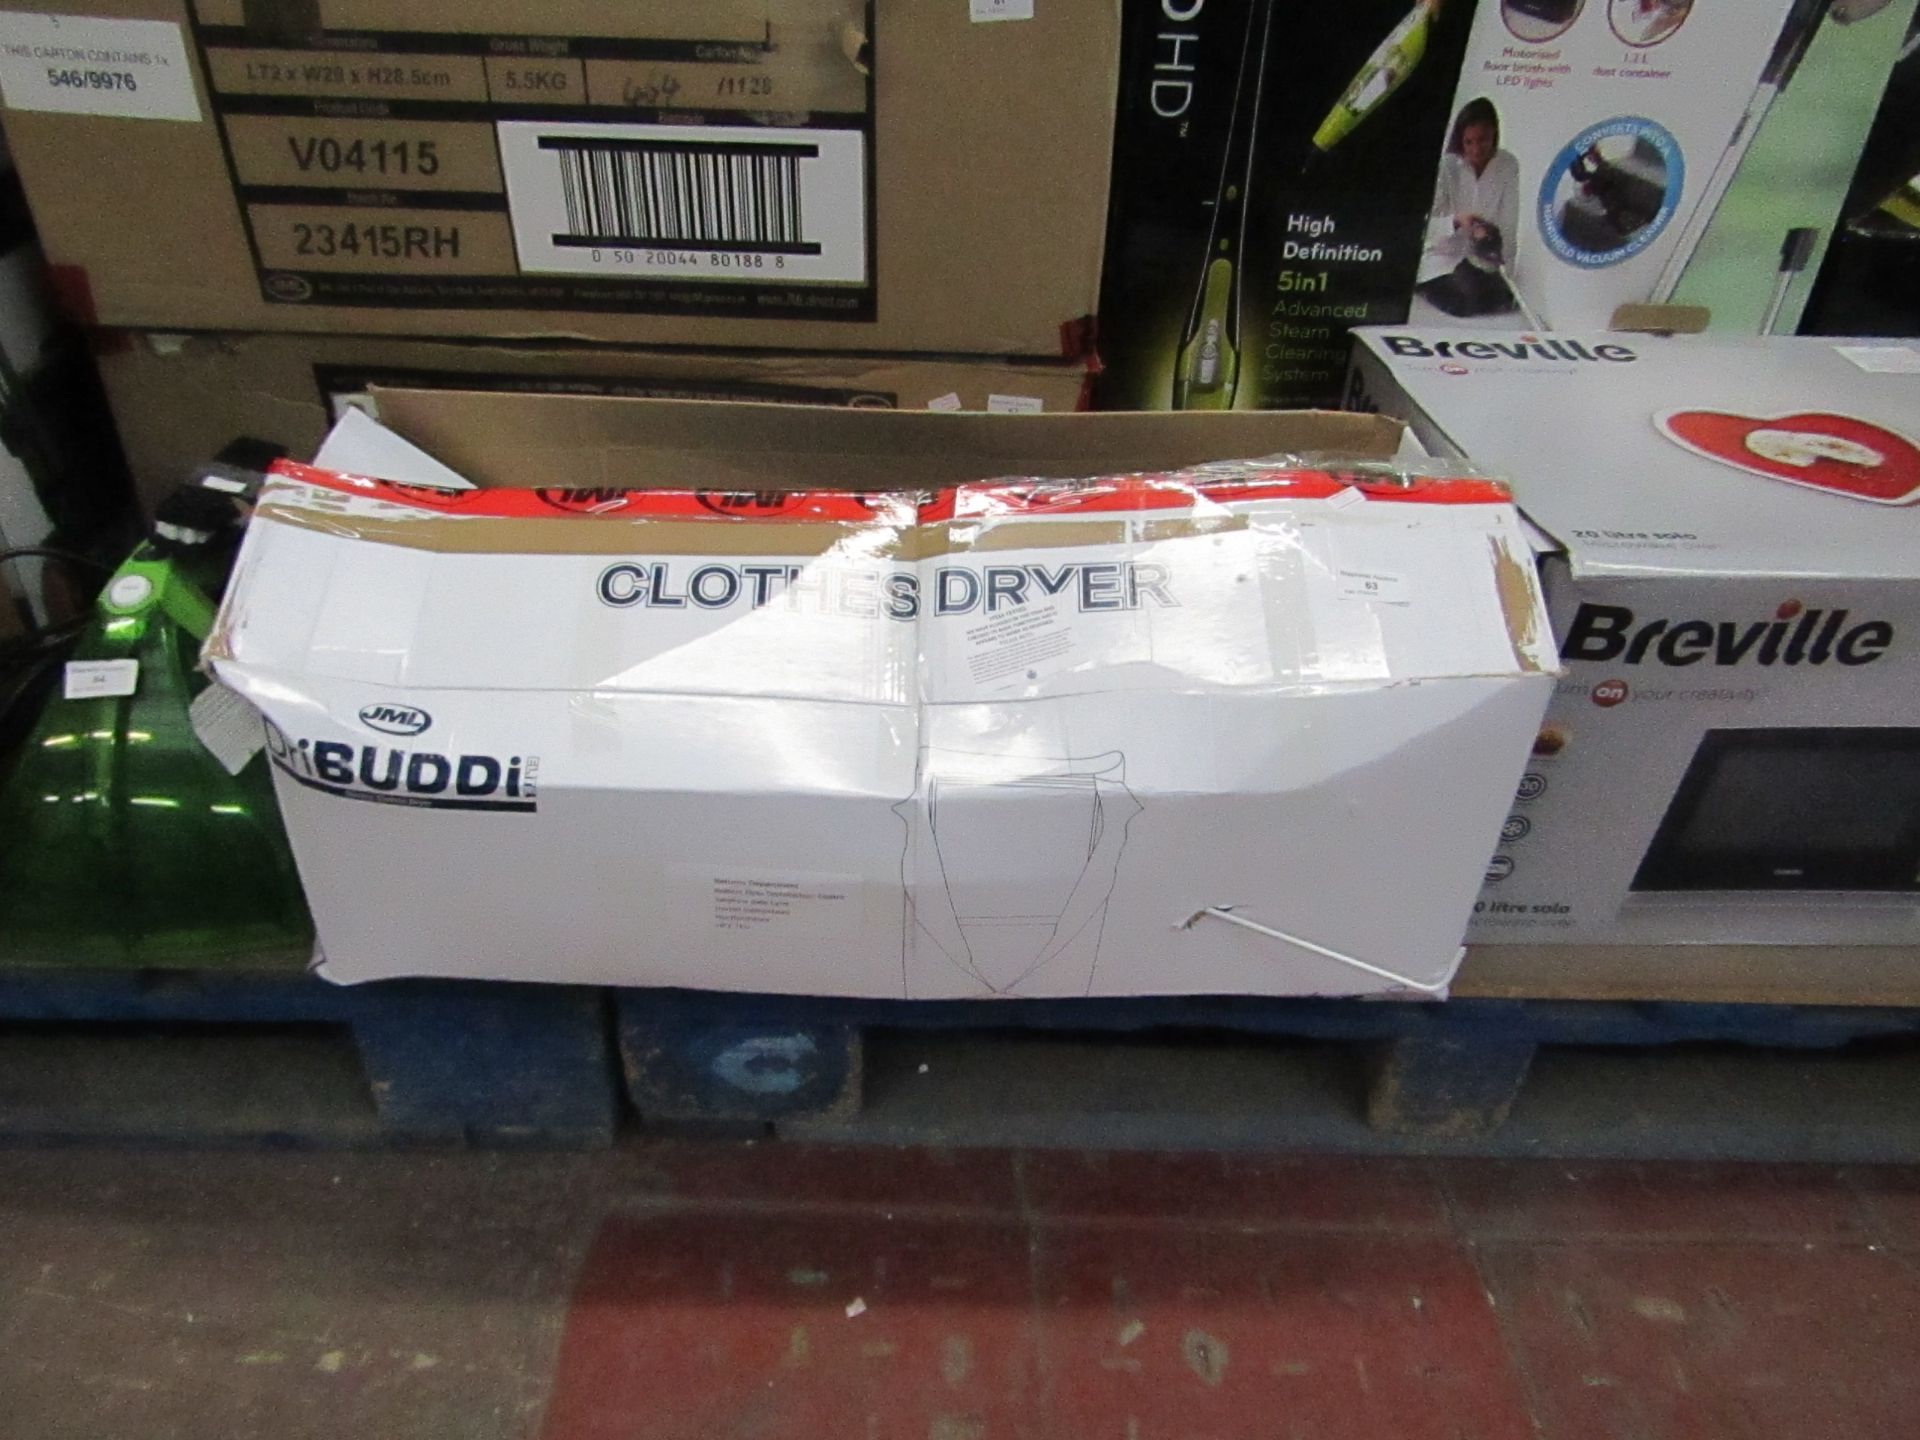 Dri buddi elite clothes dryer, tested working and boxed